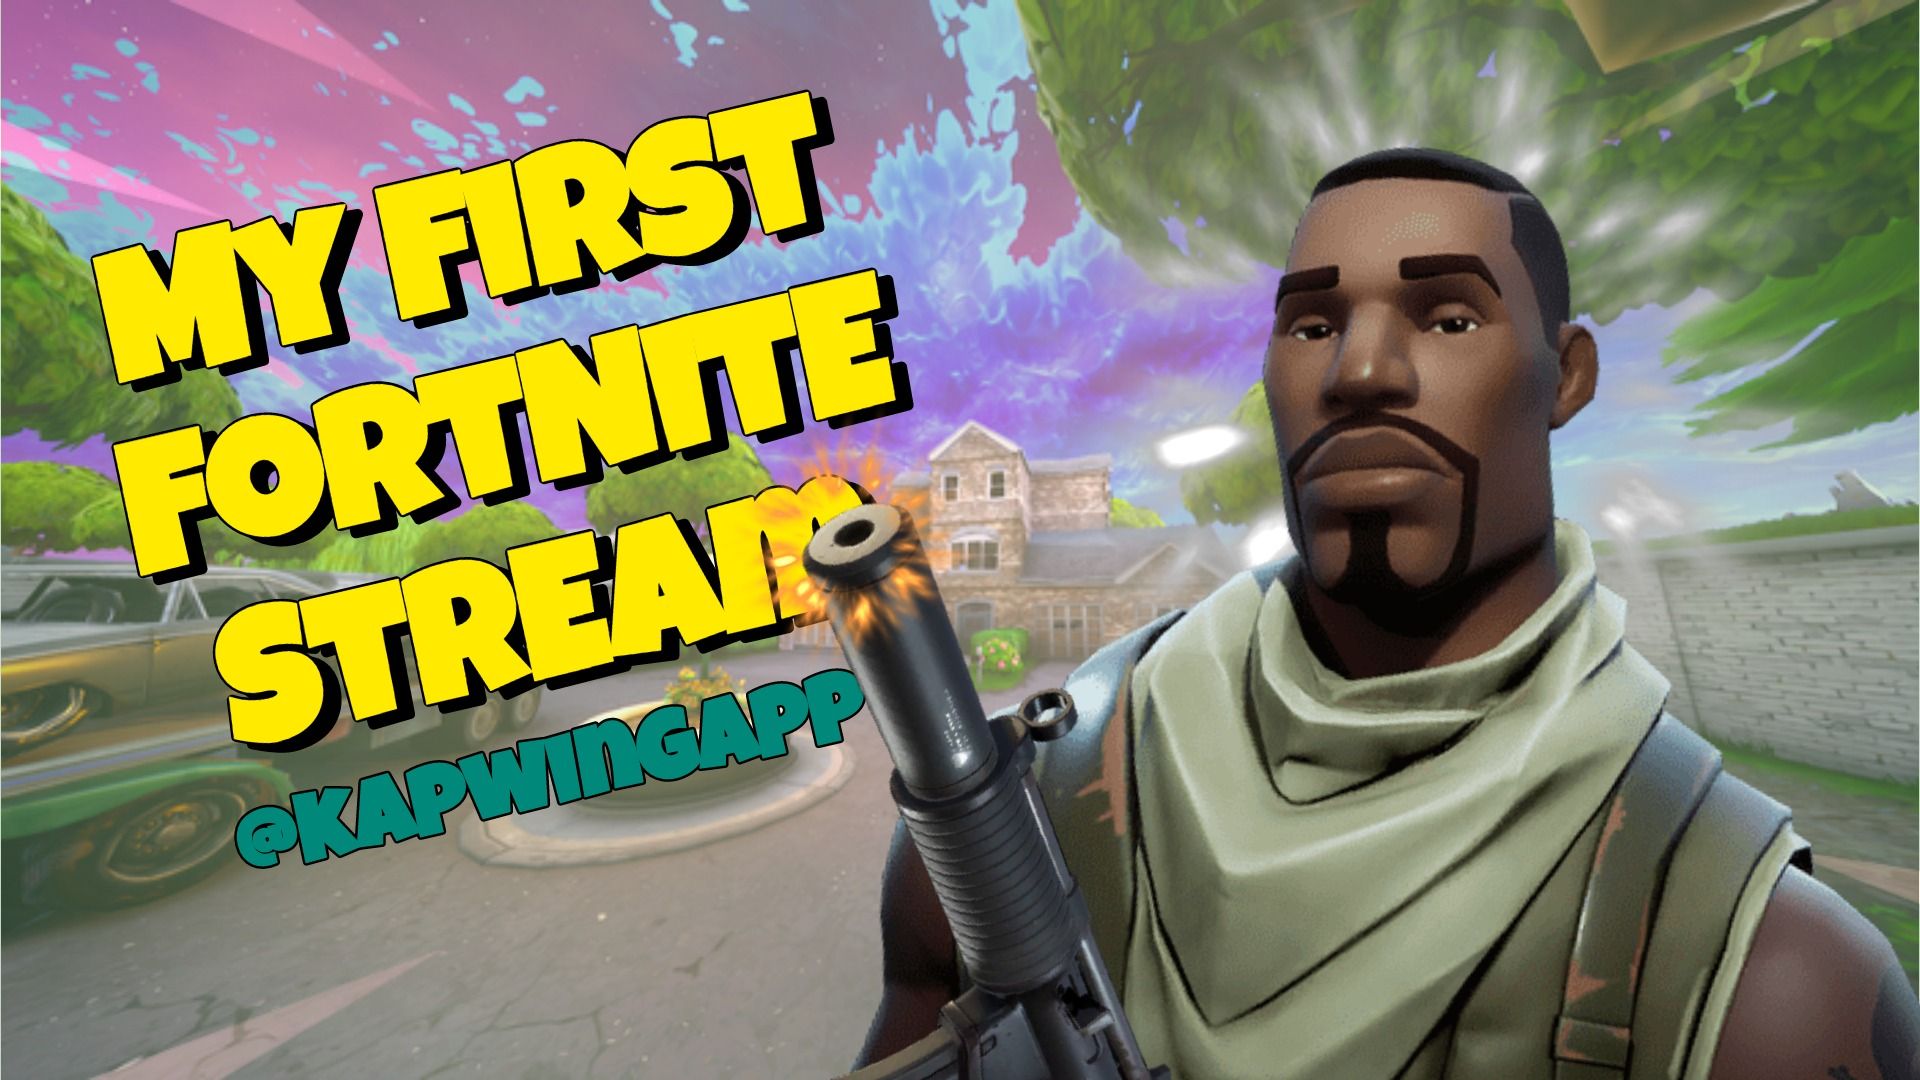 Stream Fortnite Thumbnail How To Make The Perfect Fortnite Thumbnail For Free With Templates